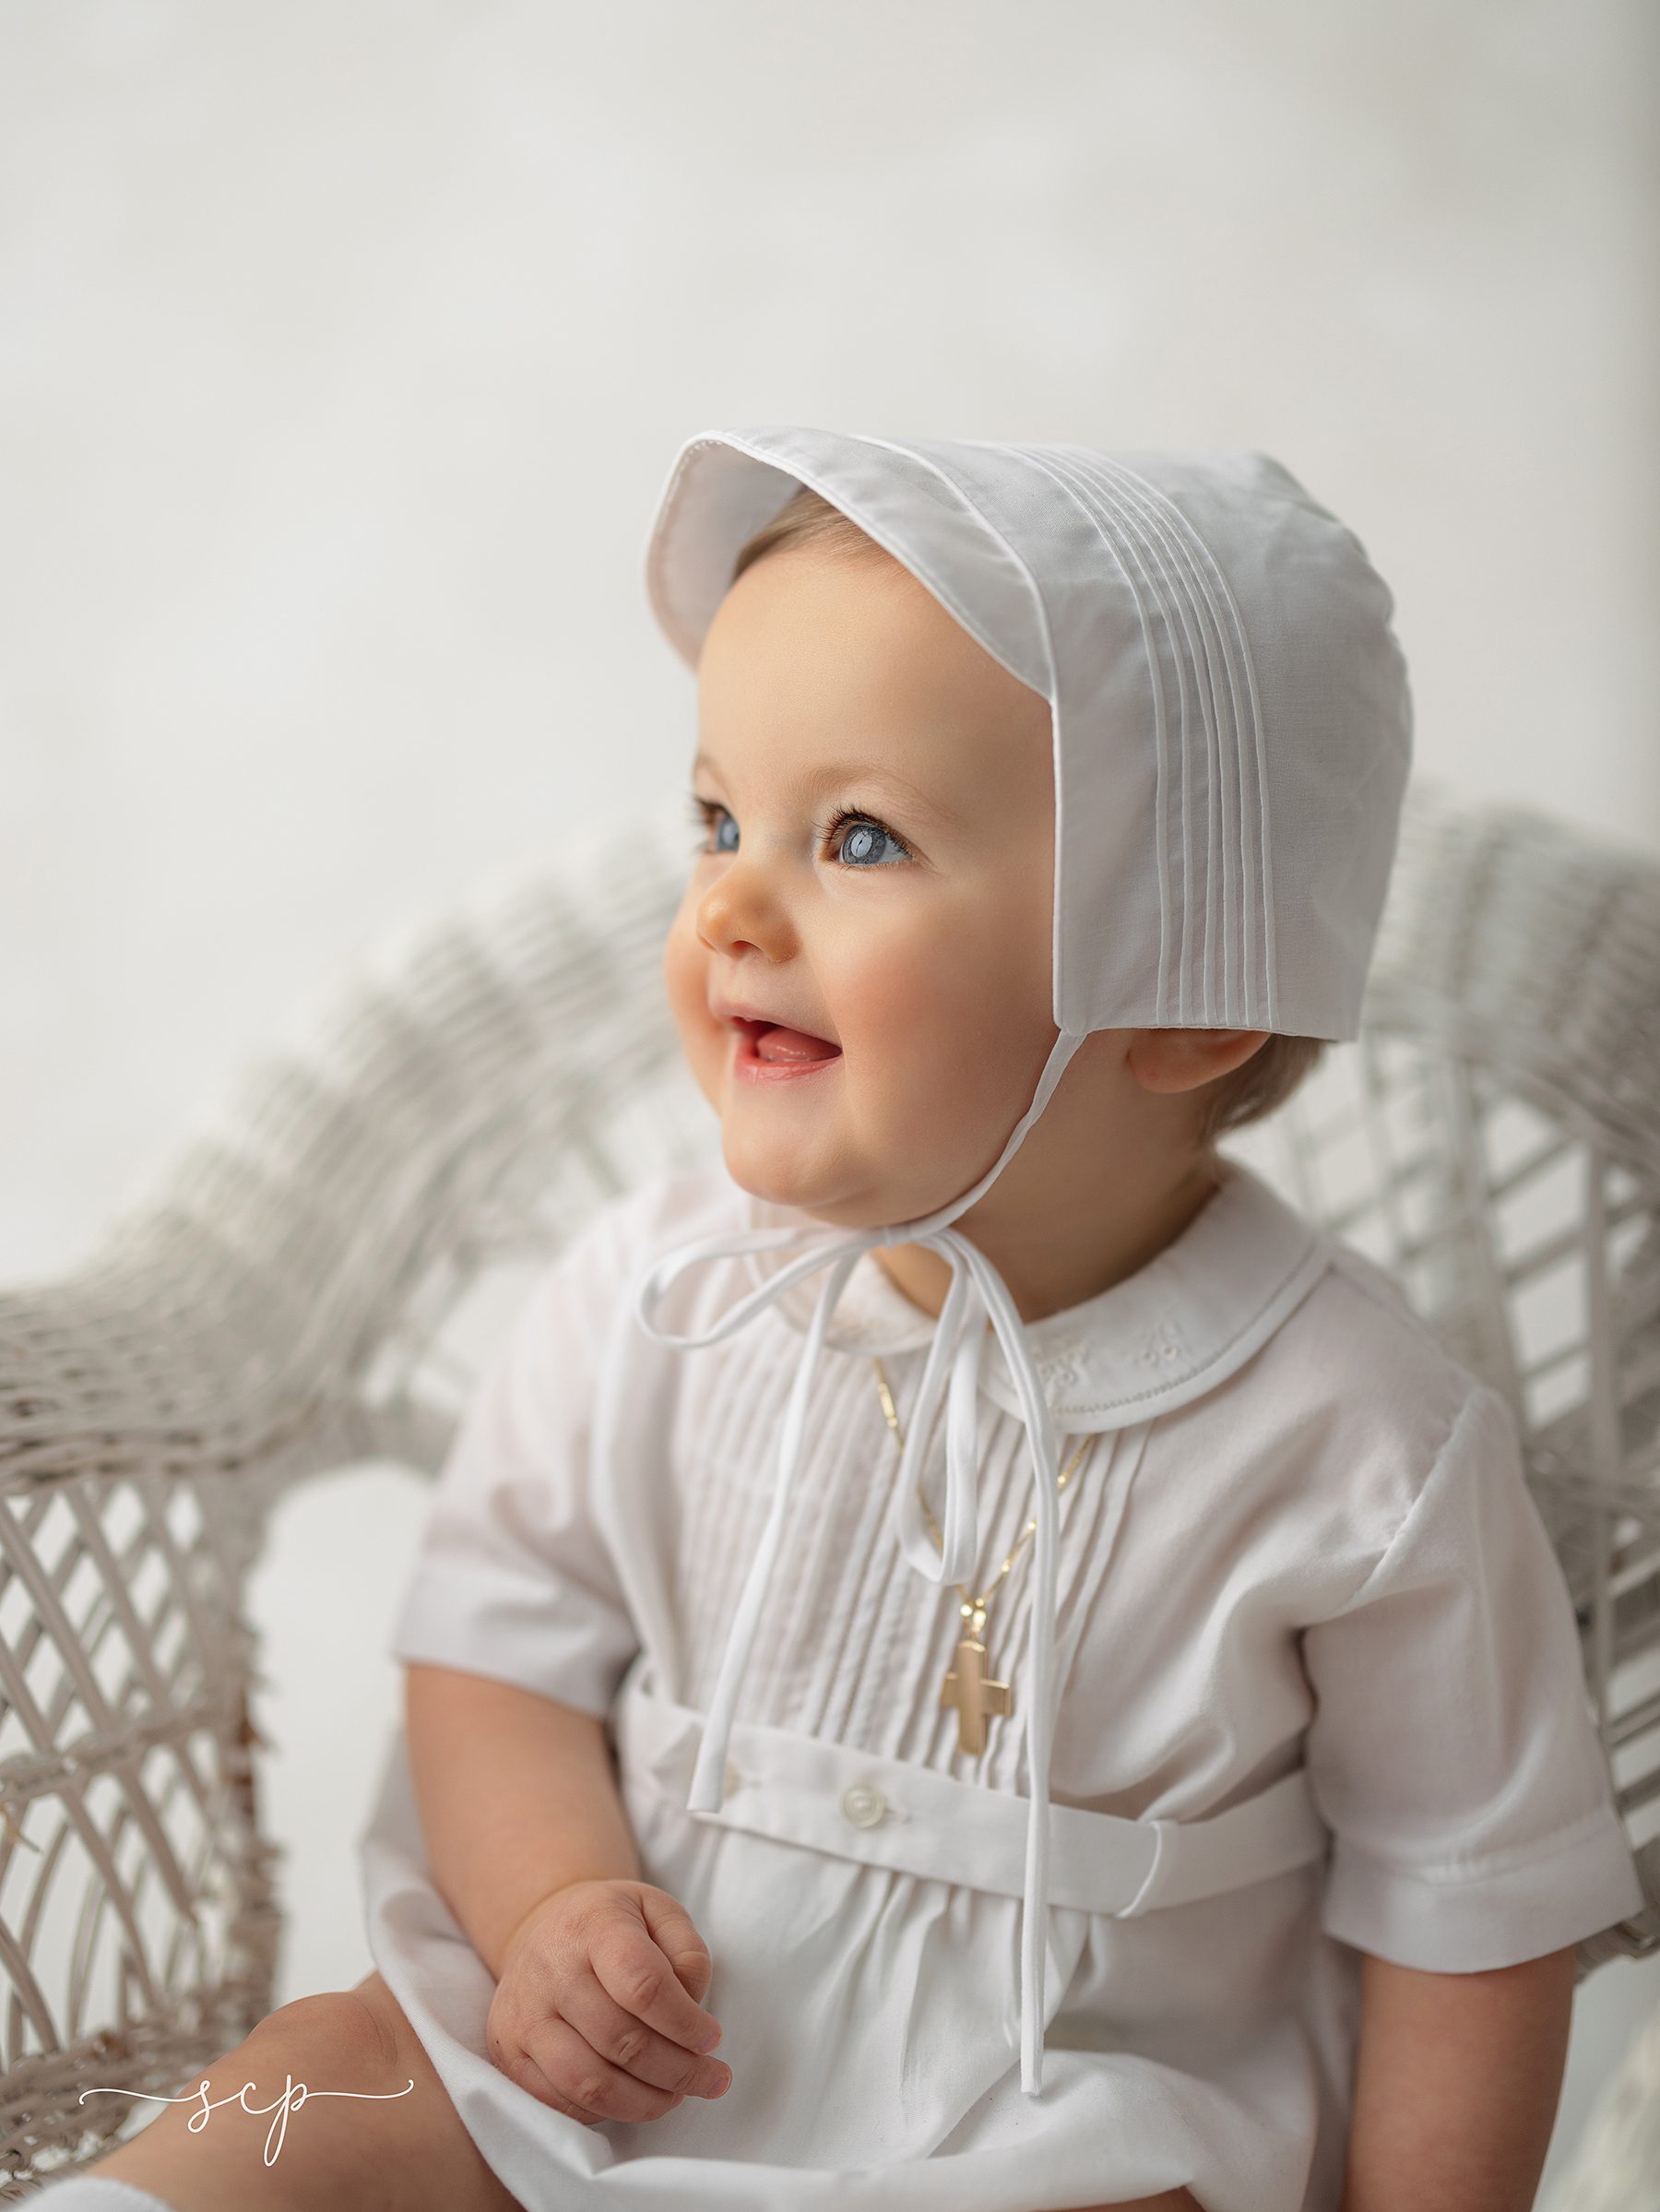 Christening gown portraits